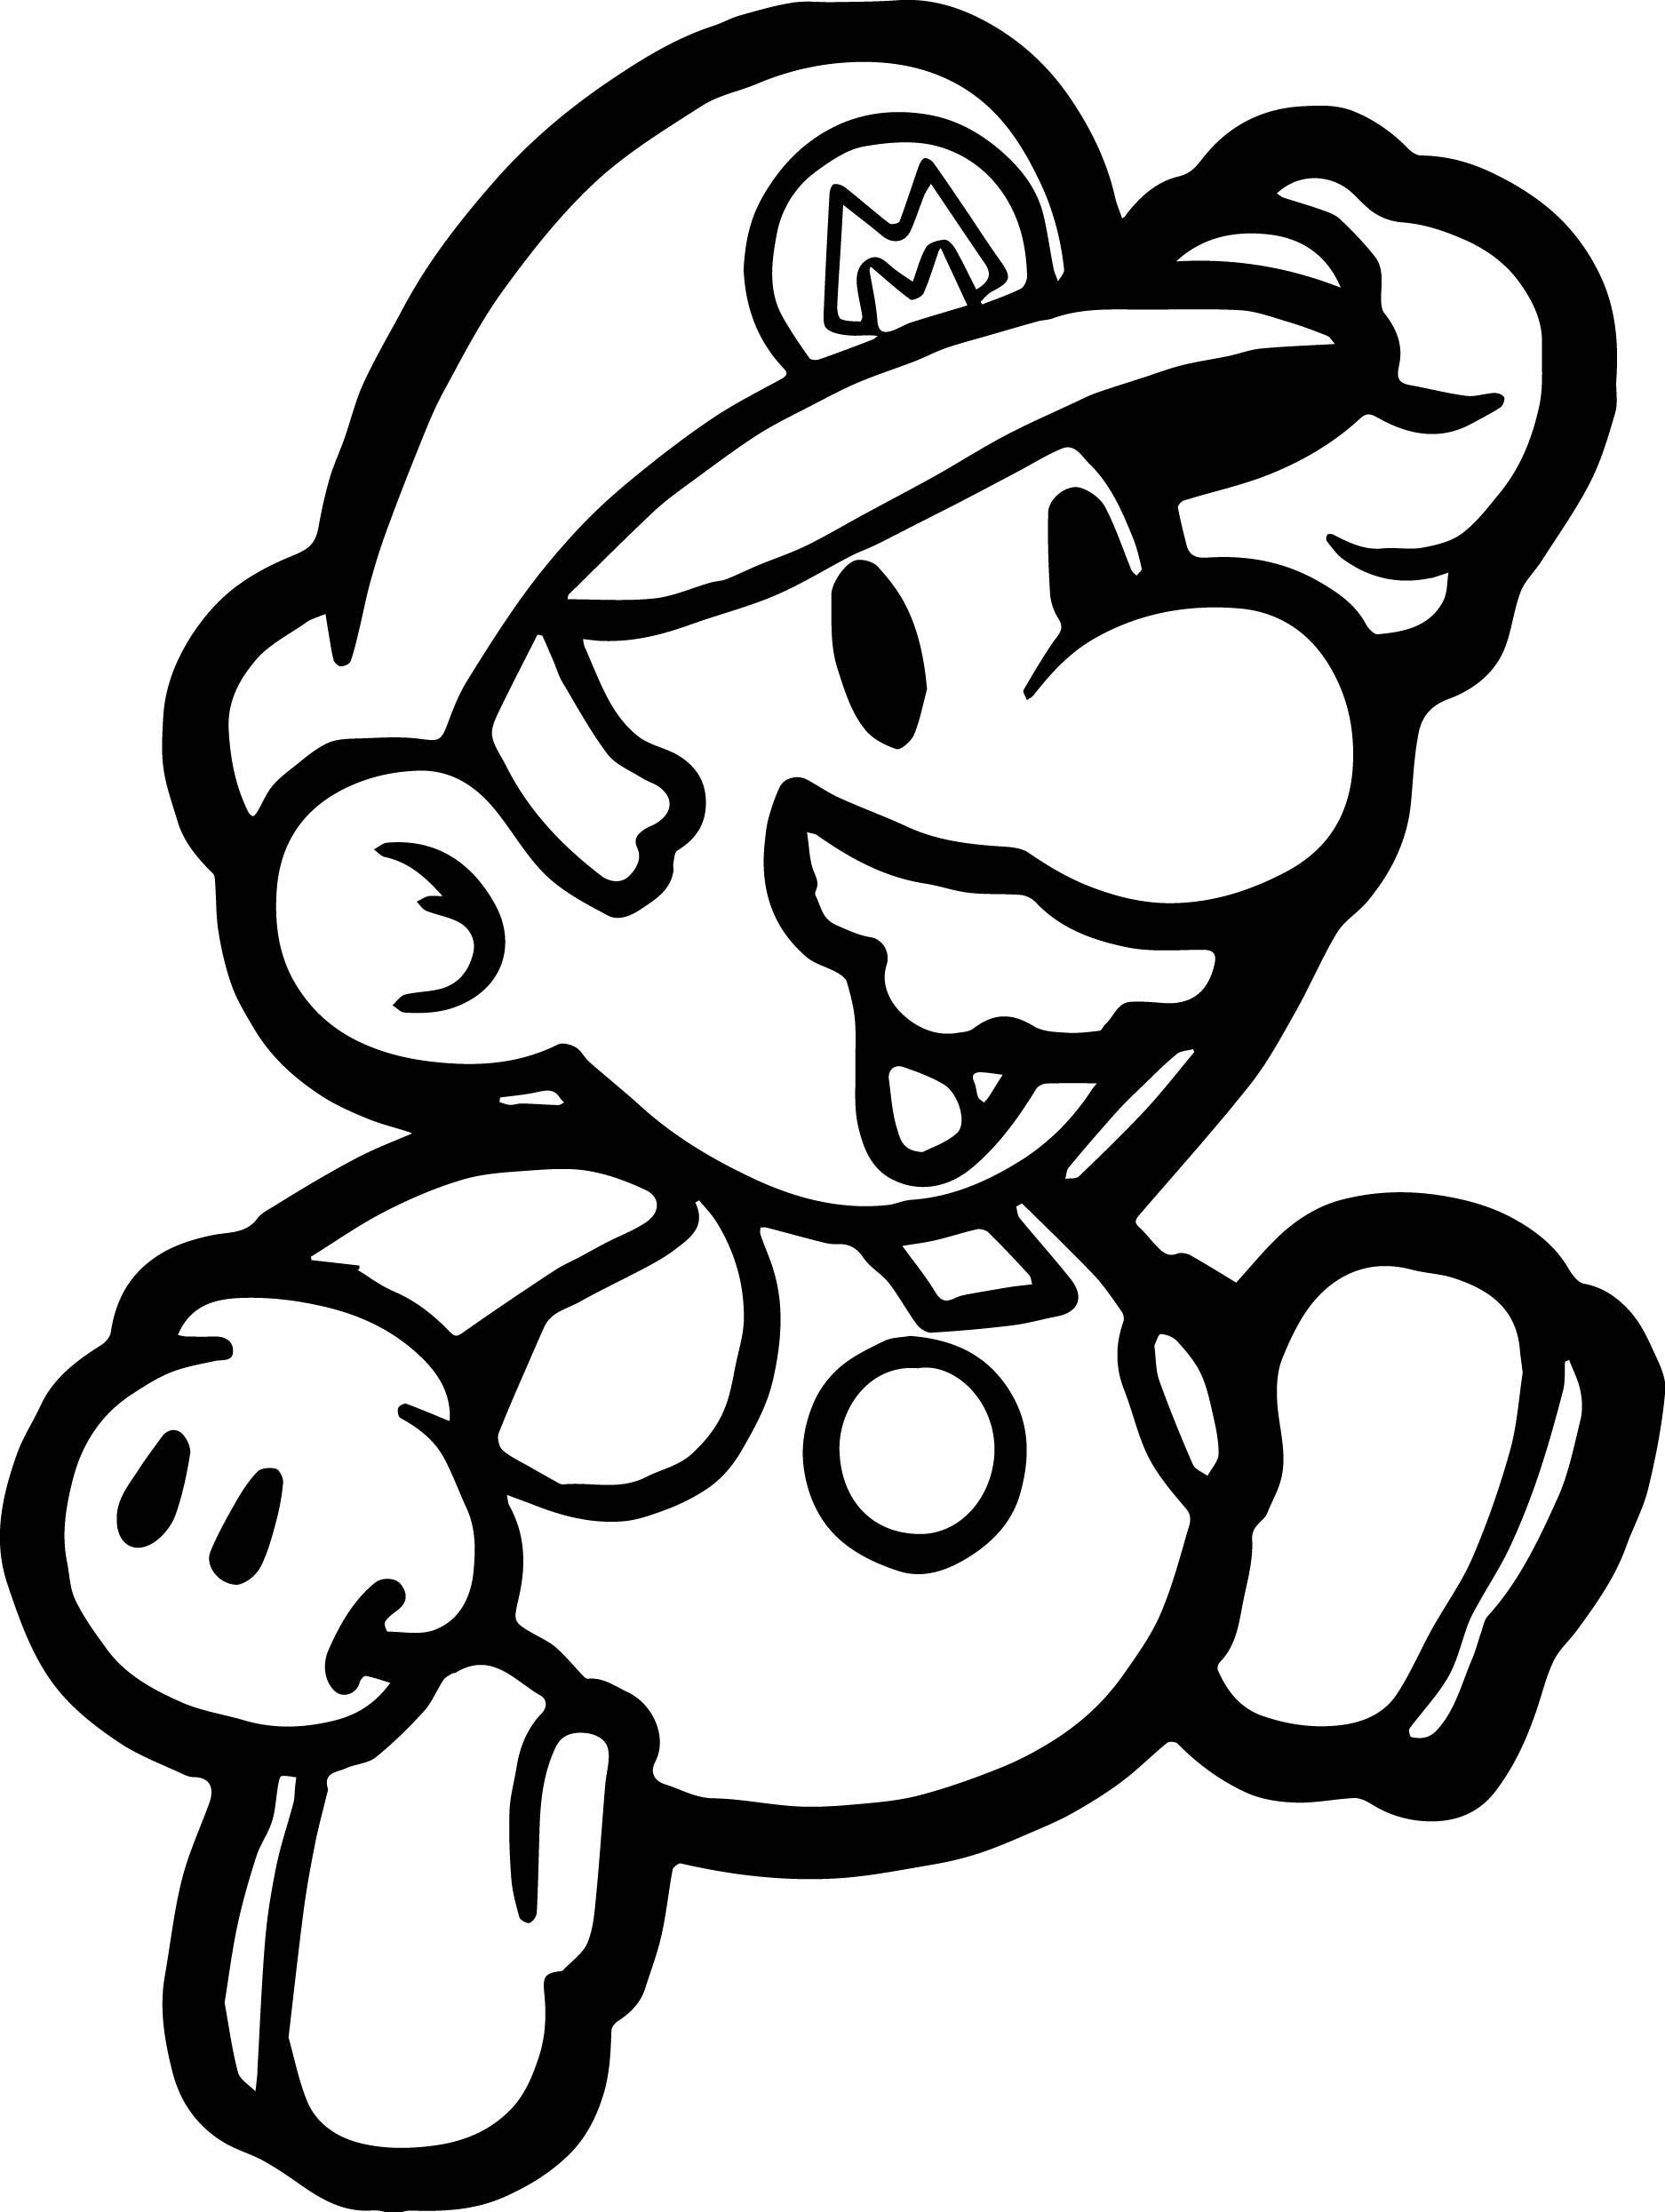 Coloring : Super Mariooring Pages To Print Book Free Odyssey For Of Super  Mario Coloring ~ Sstra Coloring